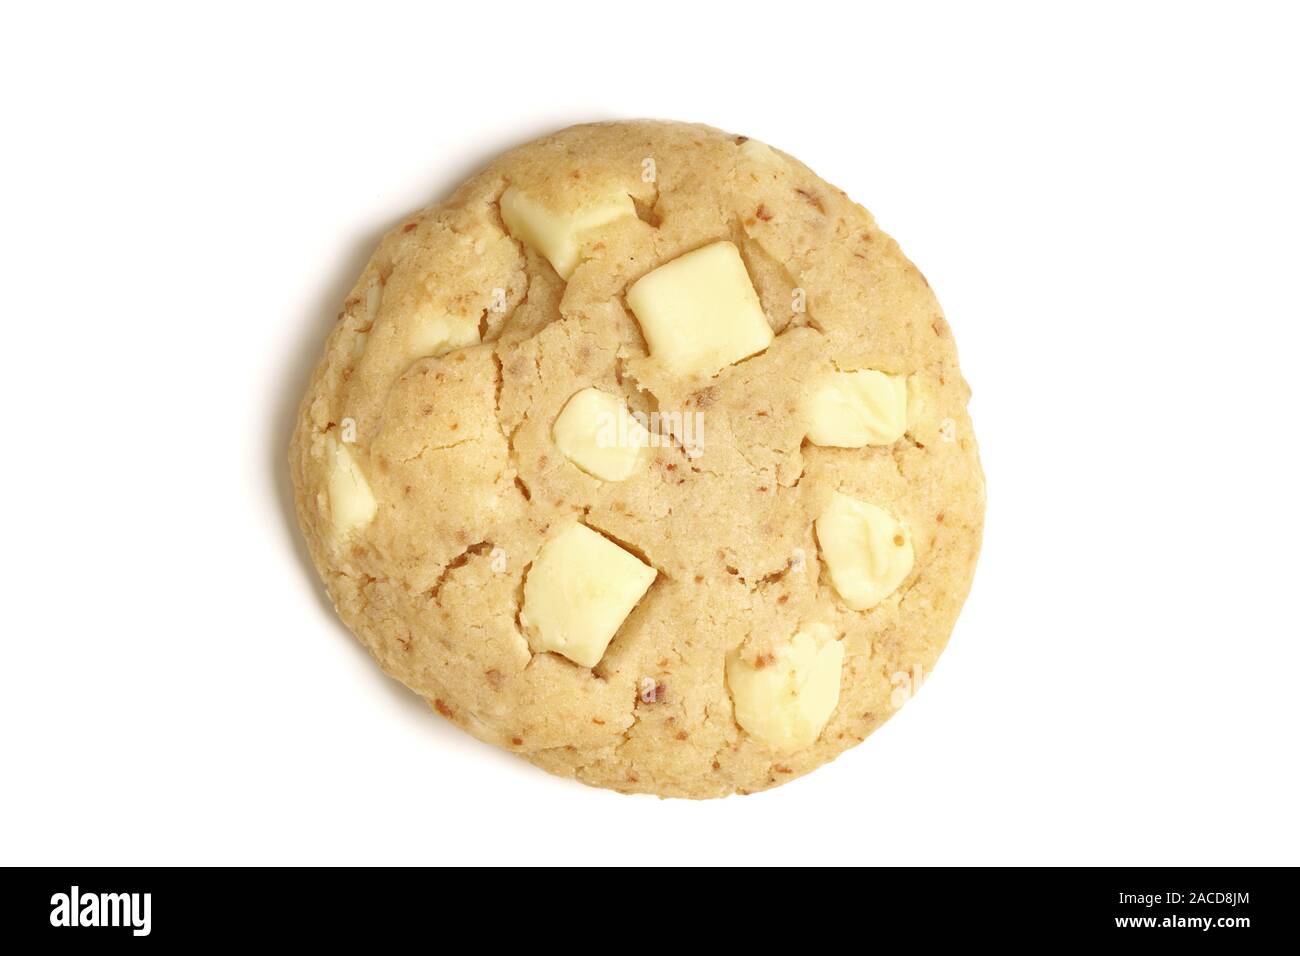 american style soft cookie with white choc chocolate chip - topview on white background with shadow Stock Photo